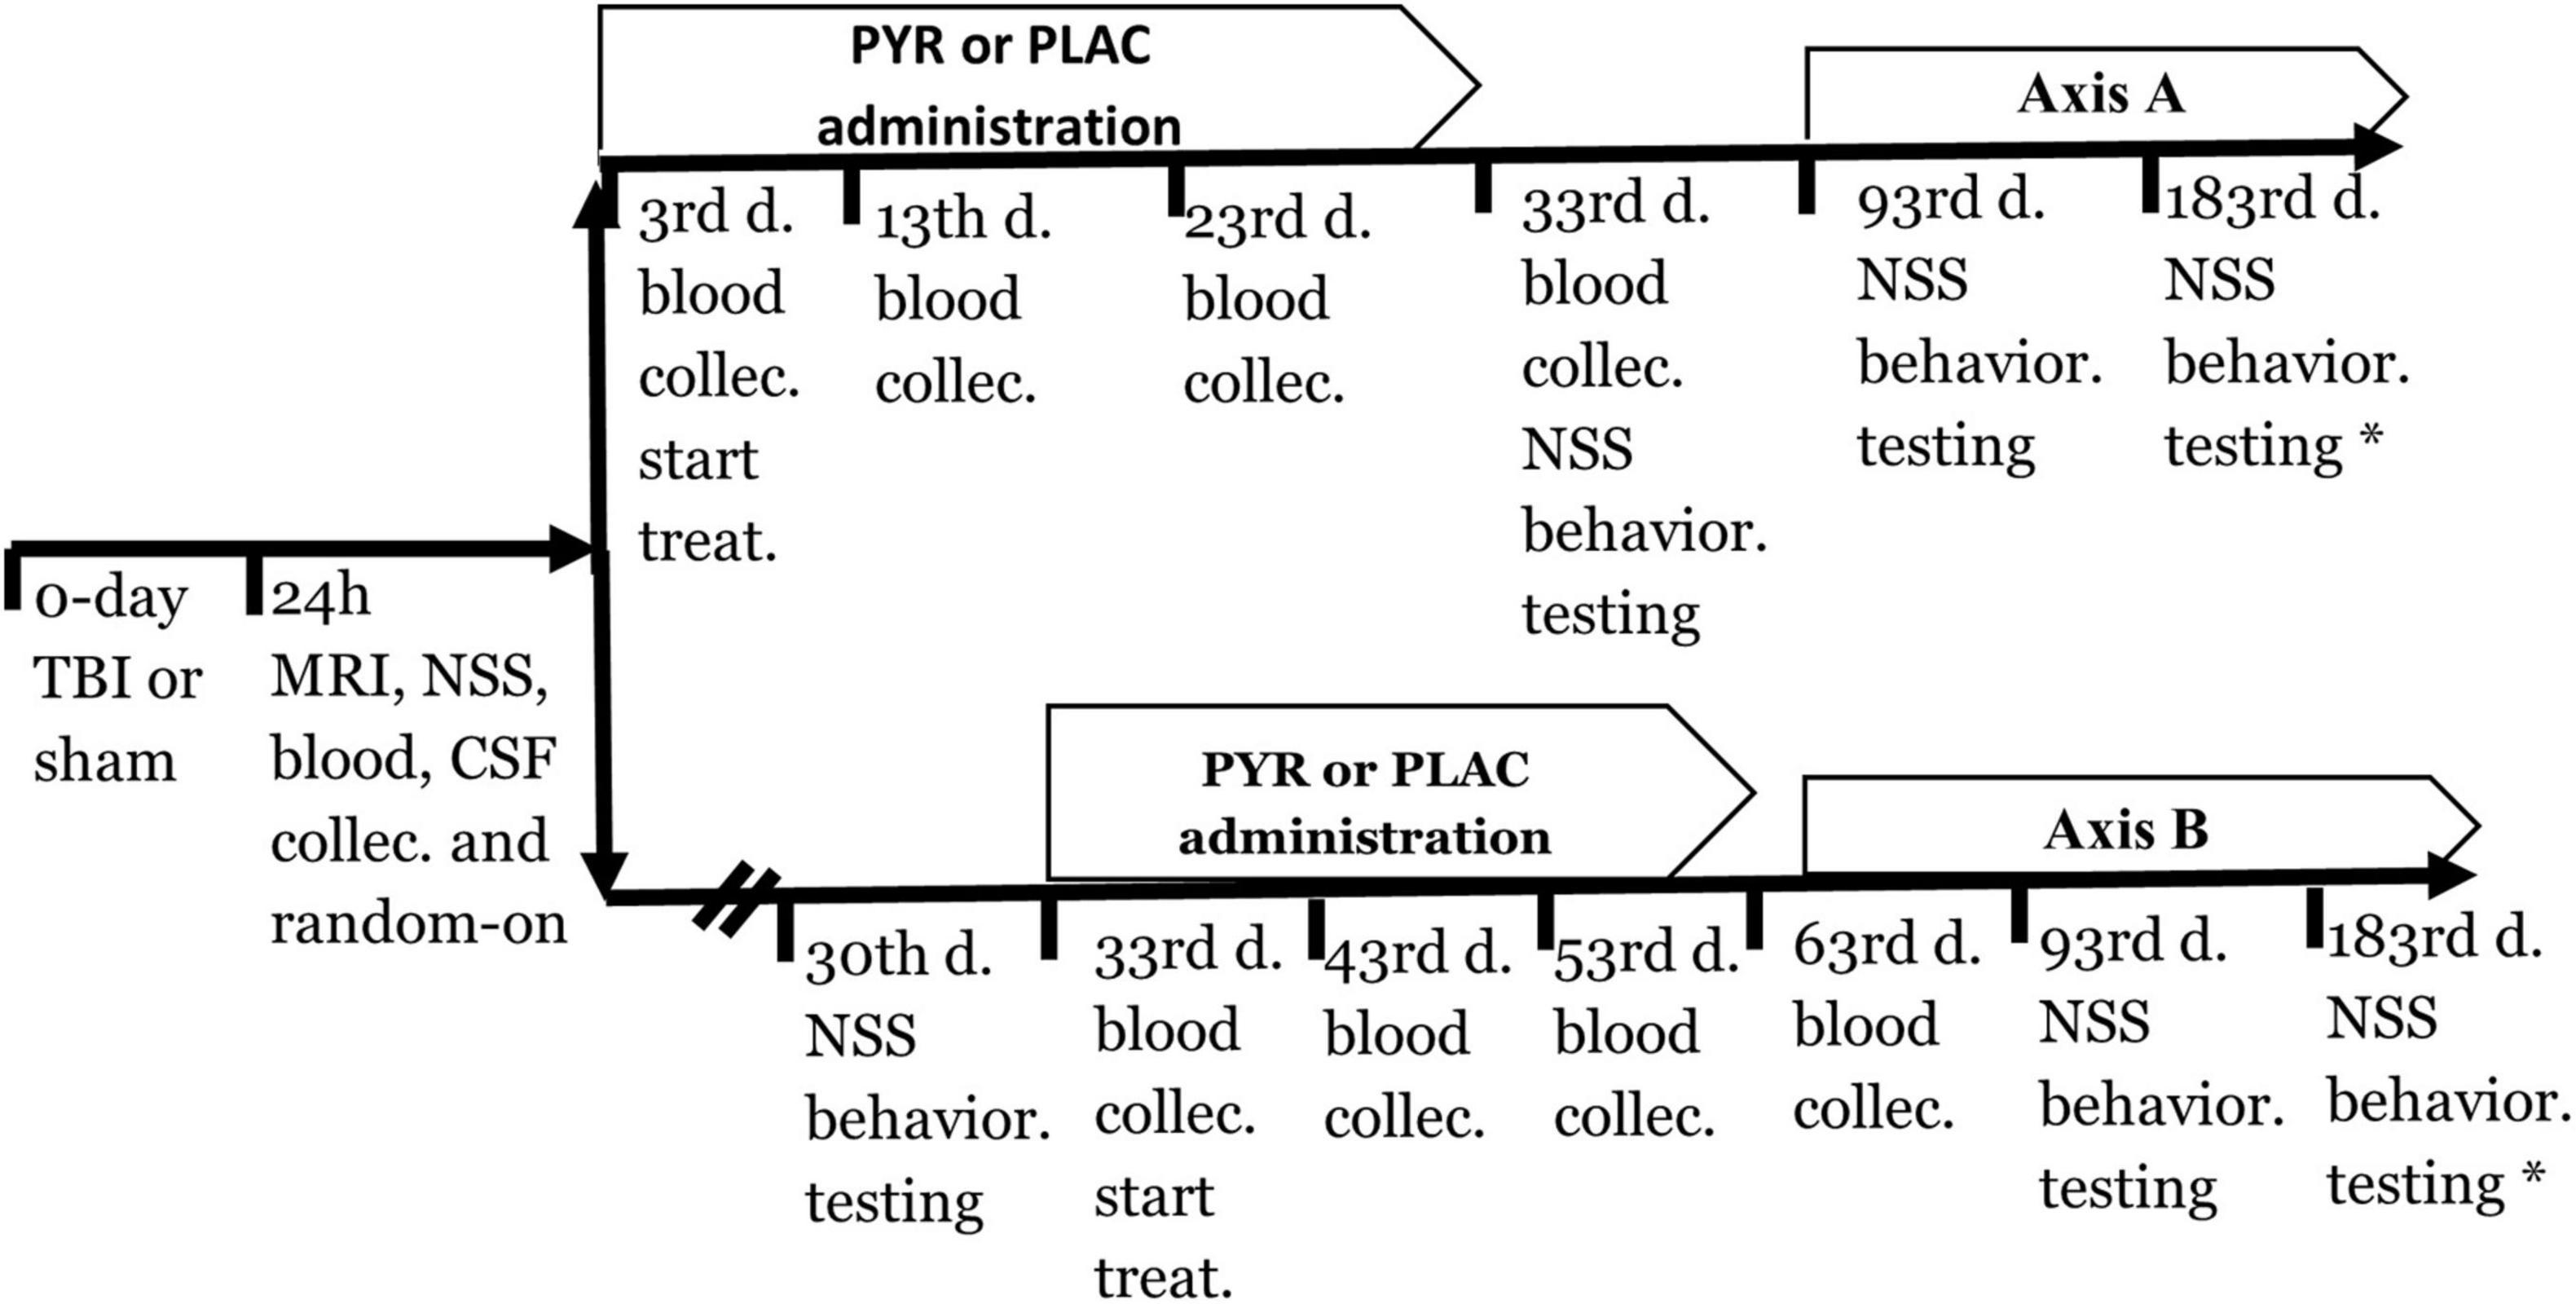 Frontiers Blood Glutamate Scavenging With Pyruvate As A Novel Preventative And Therapeutic Approach For Depressive Like Behavior Following Traumatic Brain Injury In A Rat Model